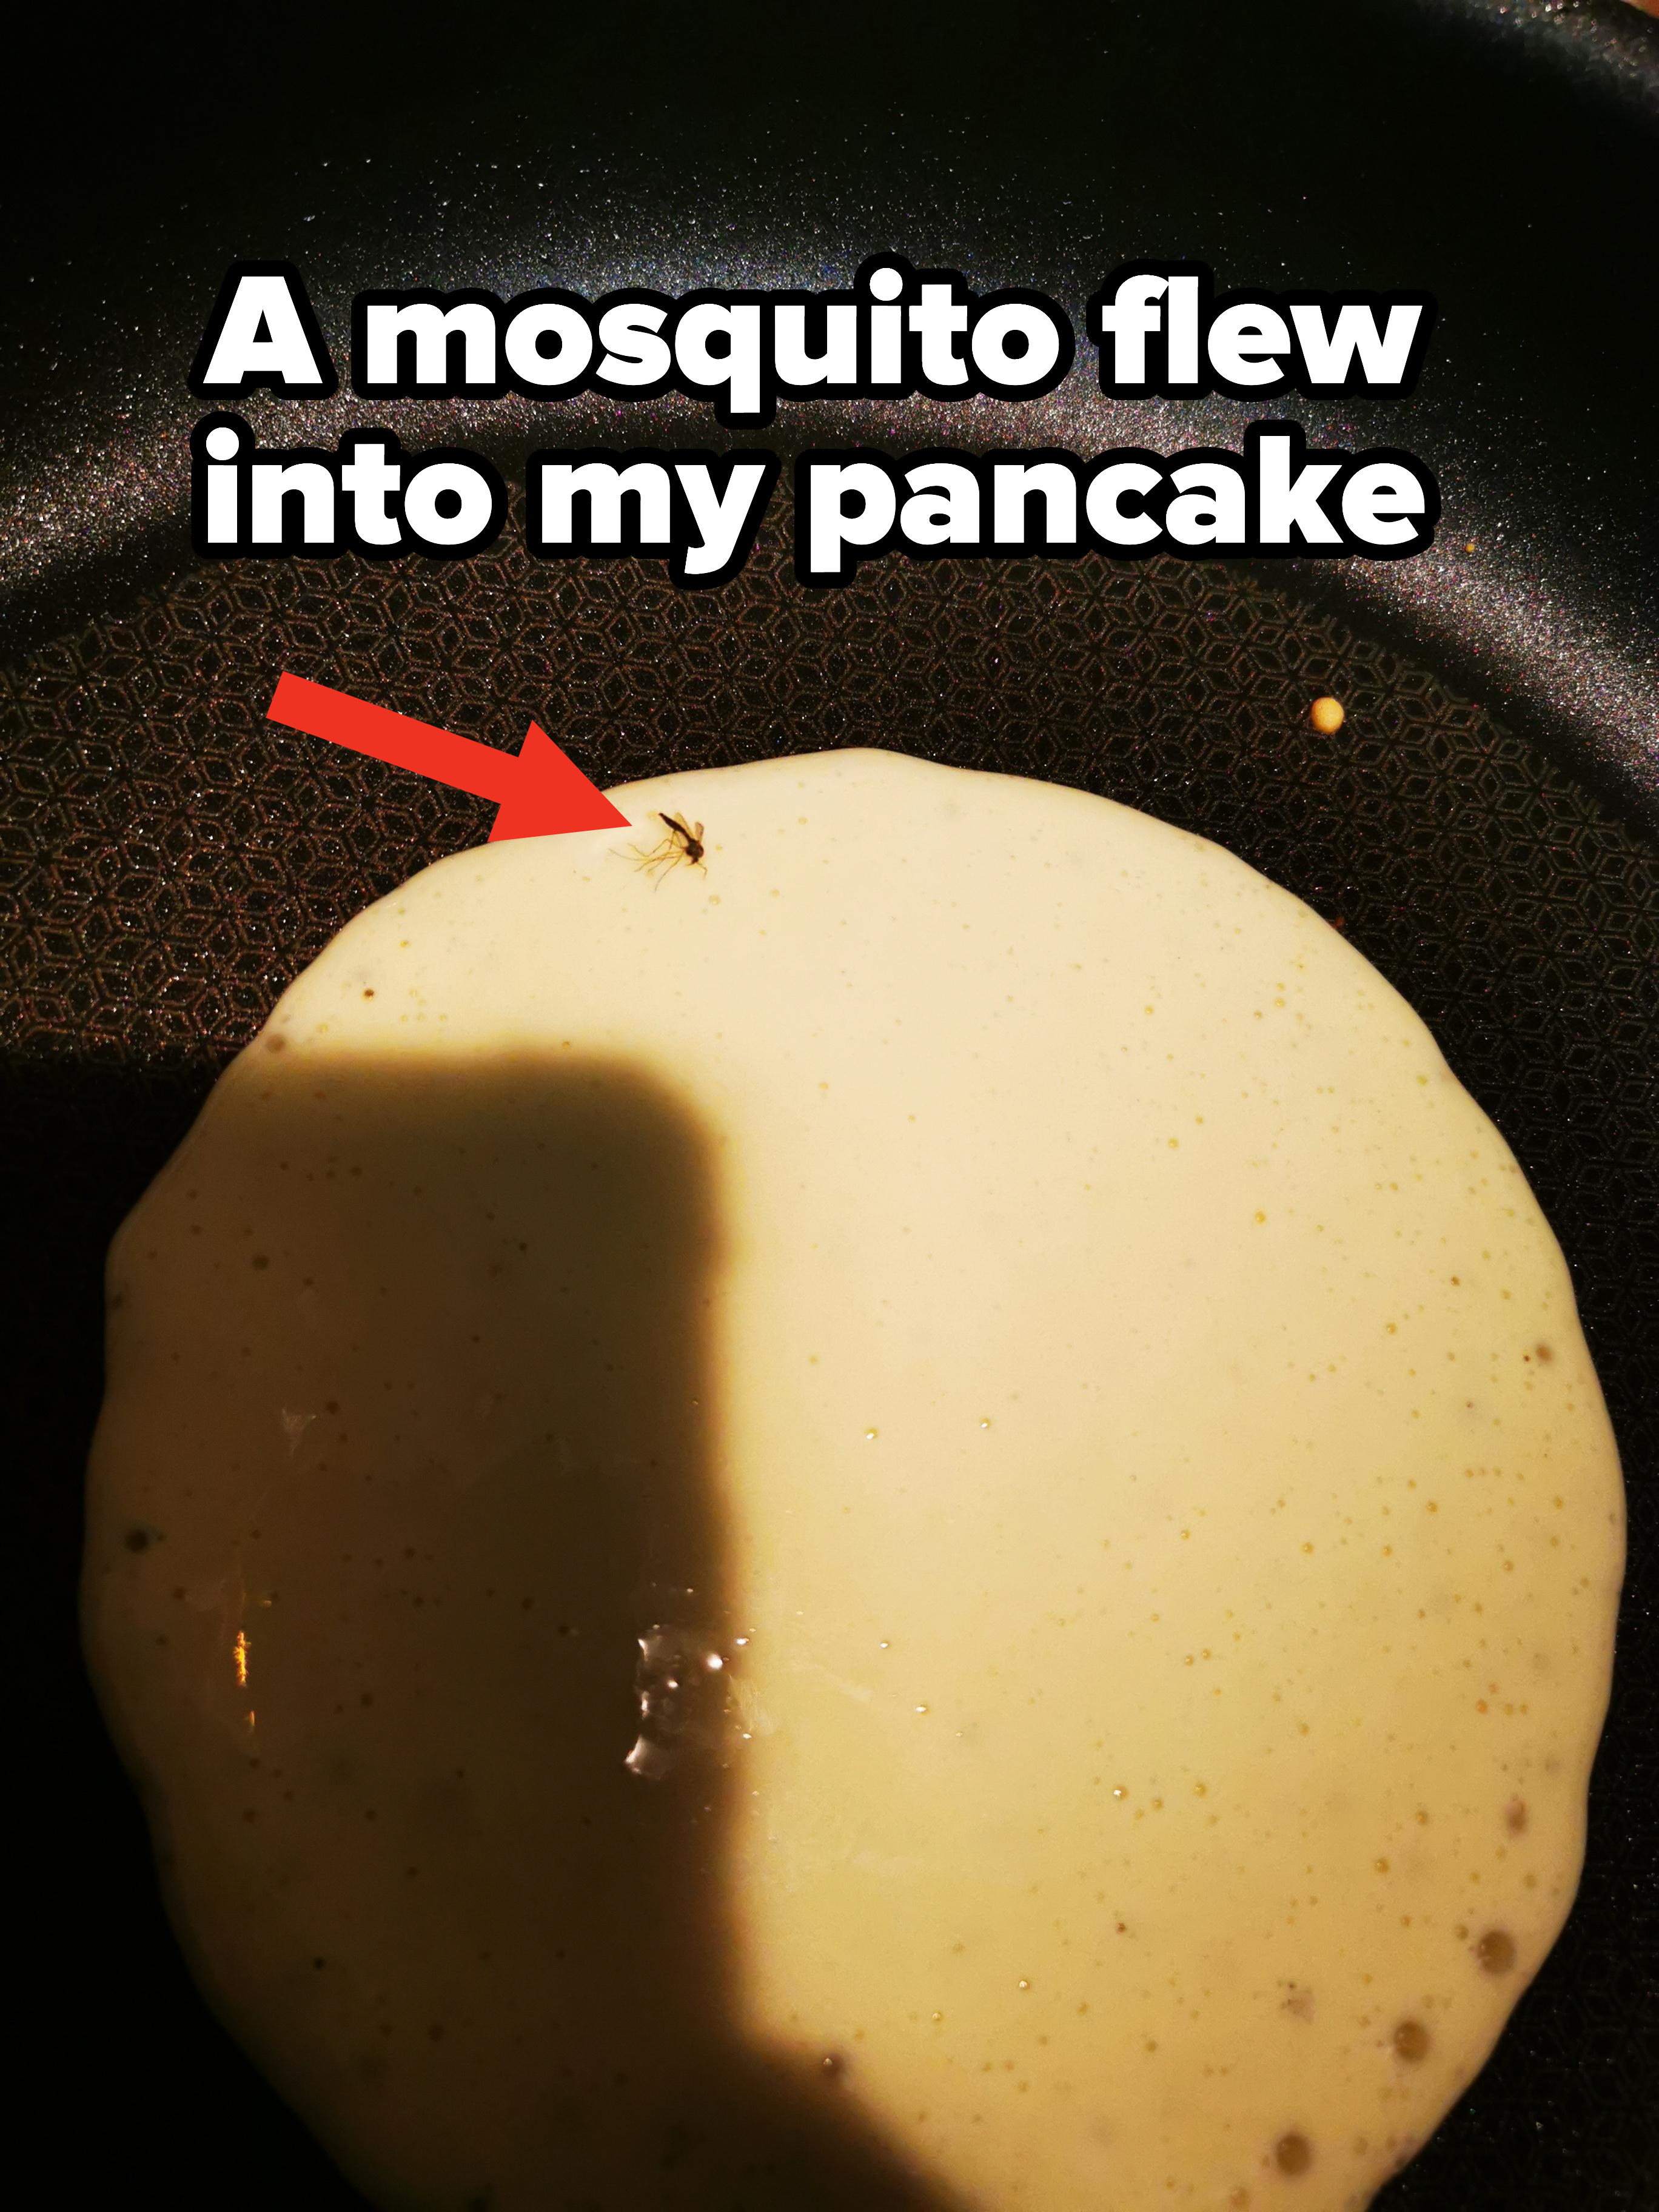 Mosquito that flew into pancake batter